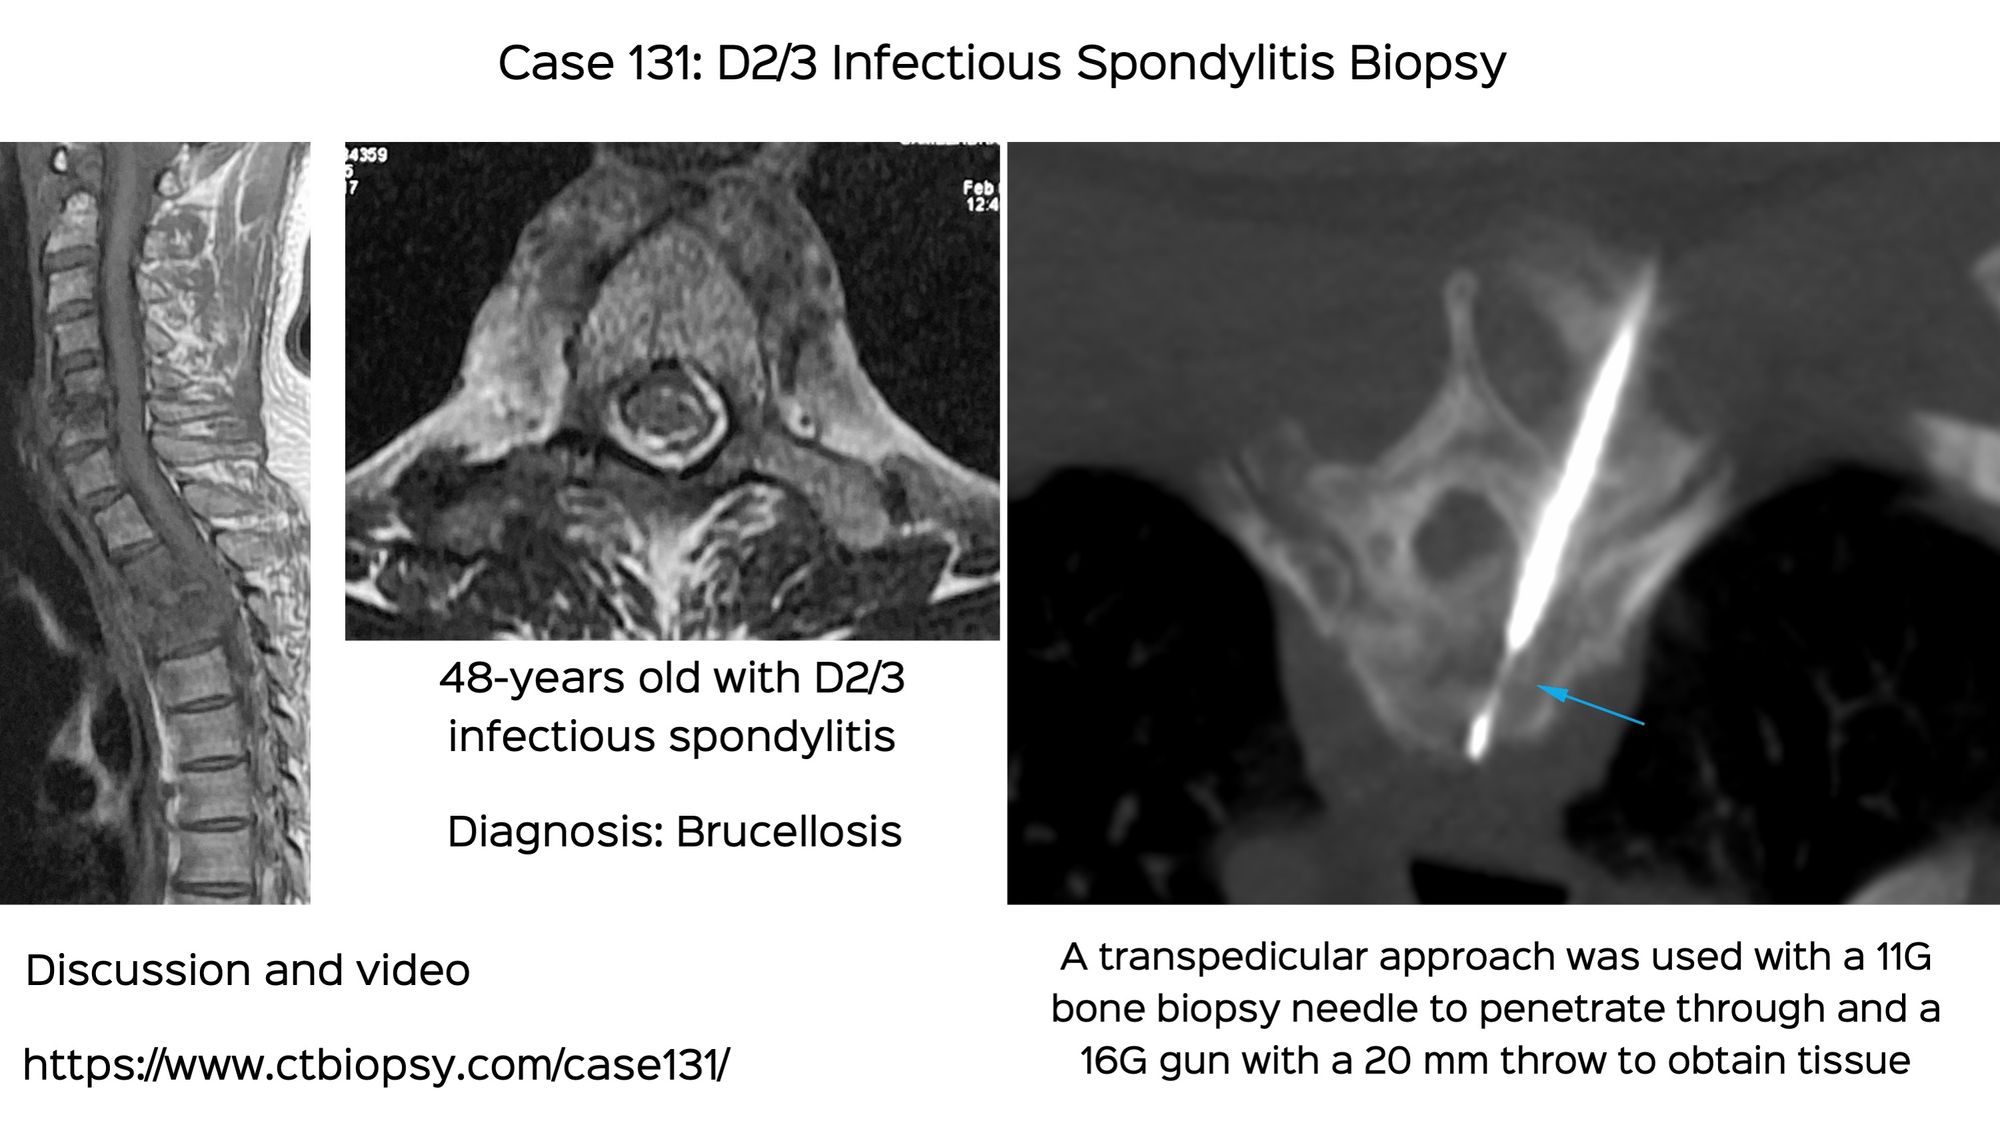 Case 131: Transpedicular Dorsal Spine Biopsy...And a Surprise Diagnosis